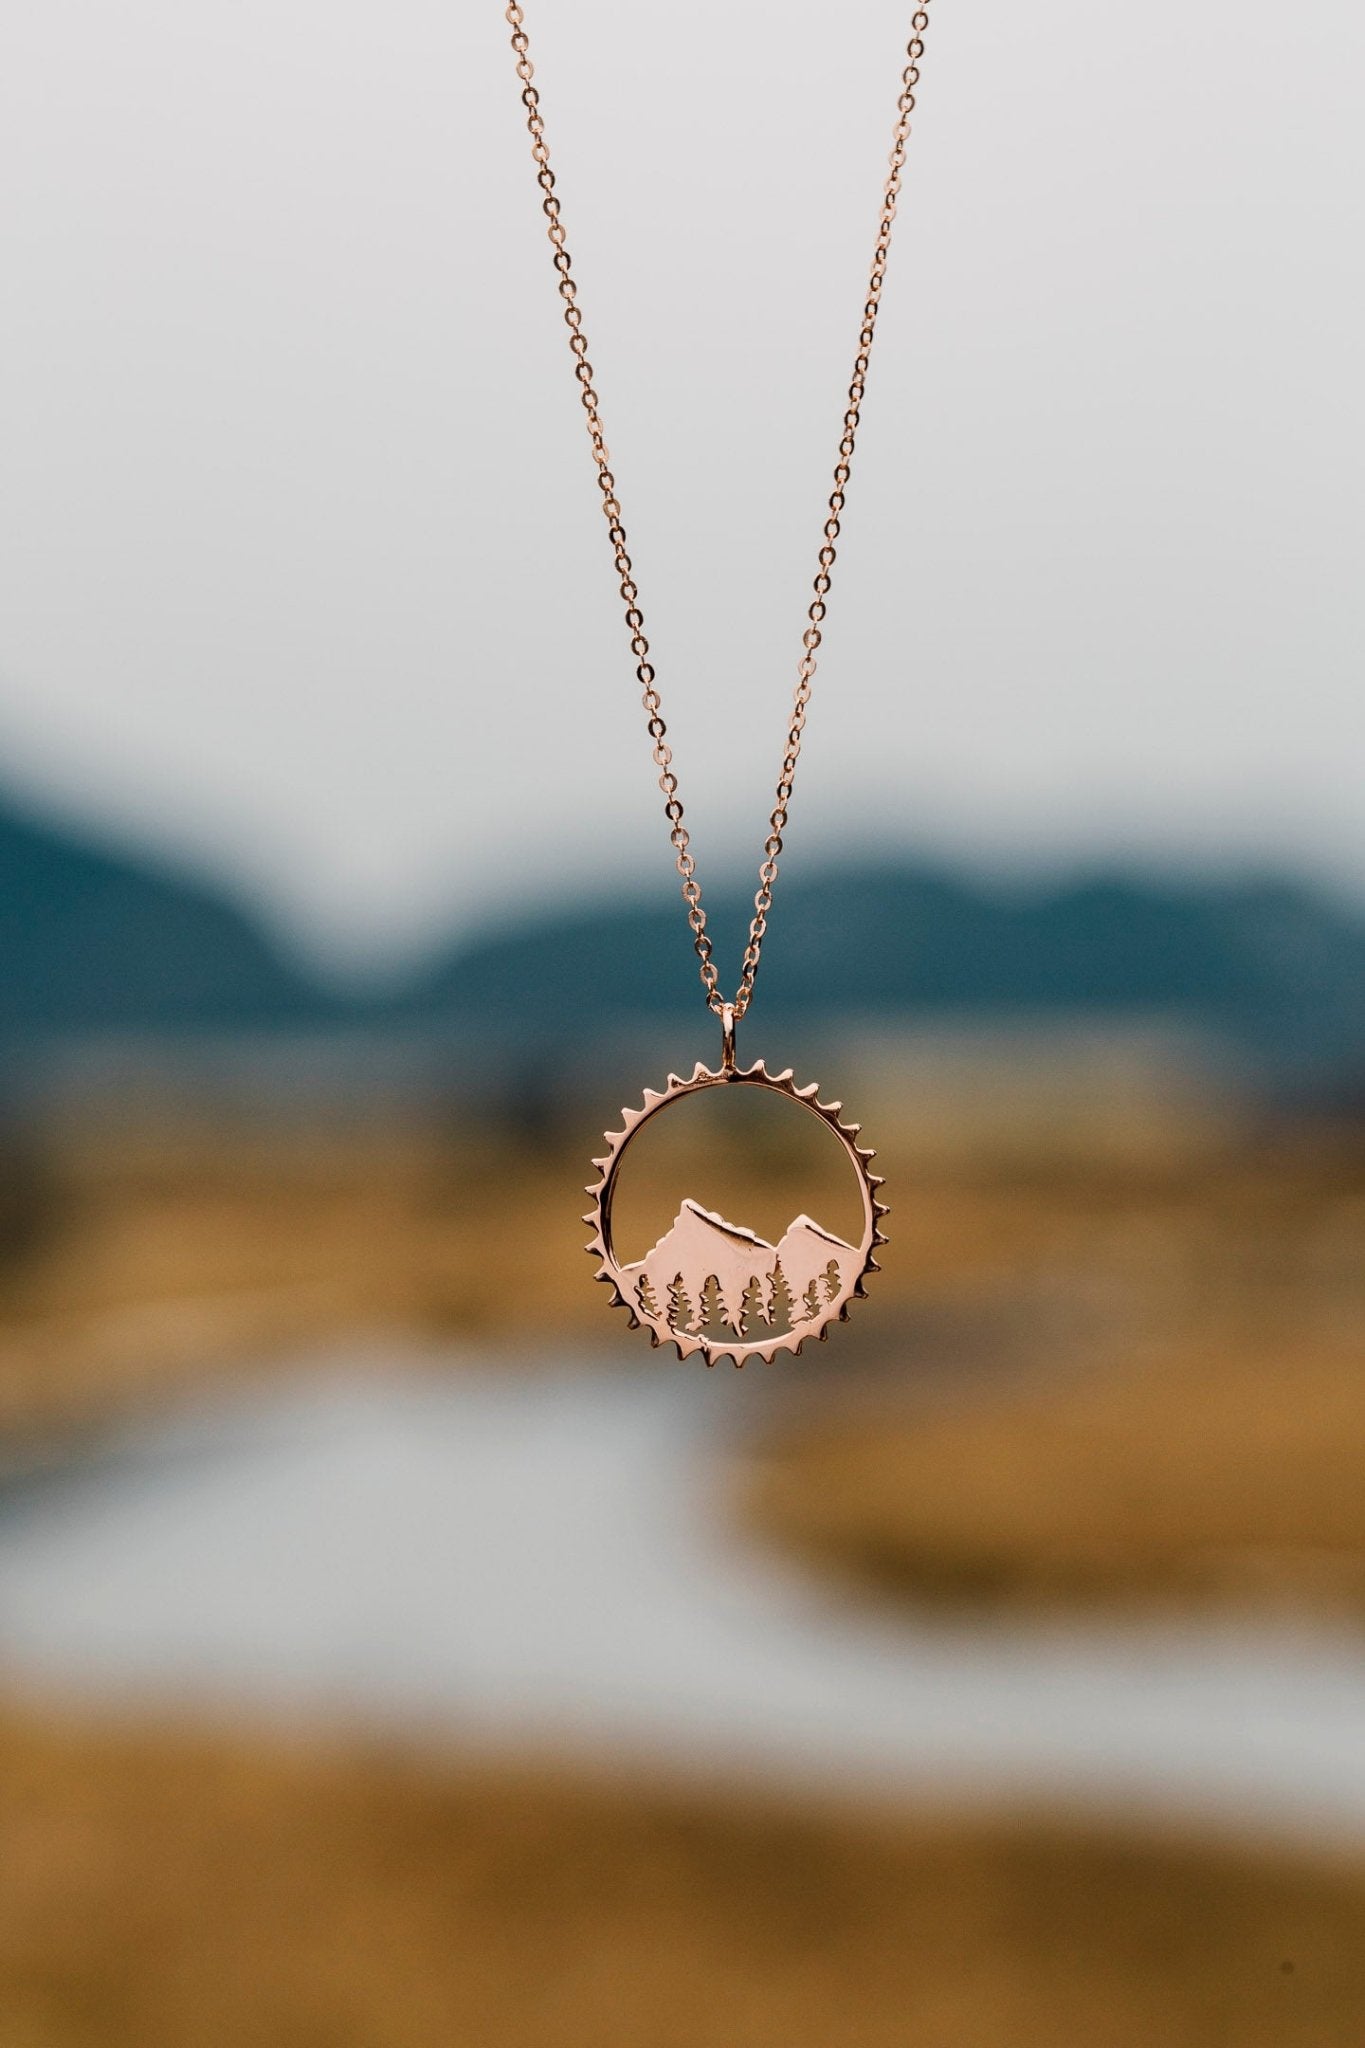 Rose gold Amore pendant necklace shown with blurred blurred river background